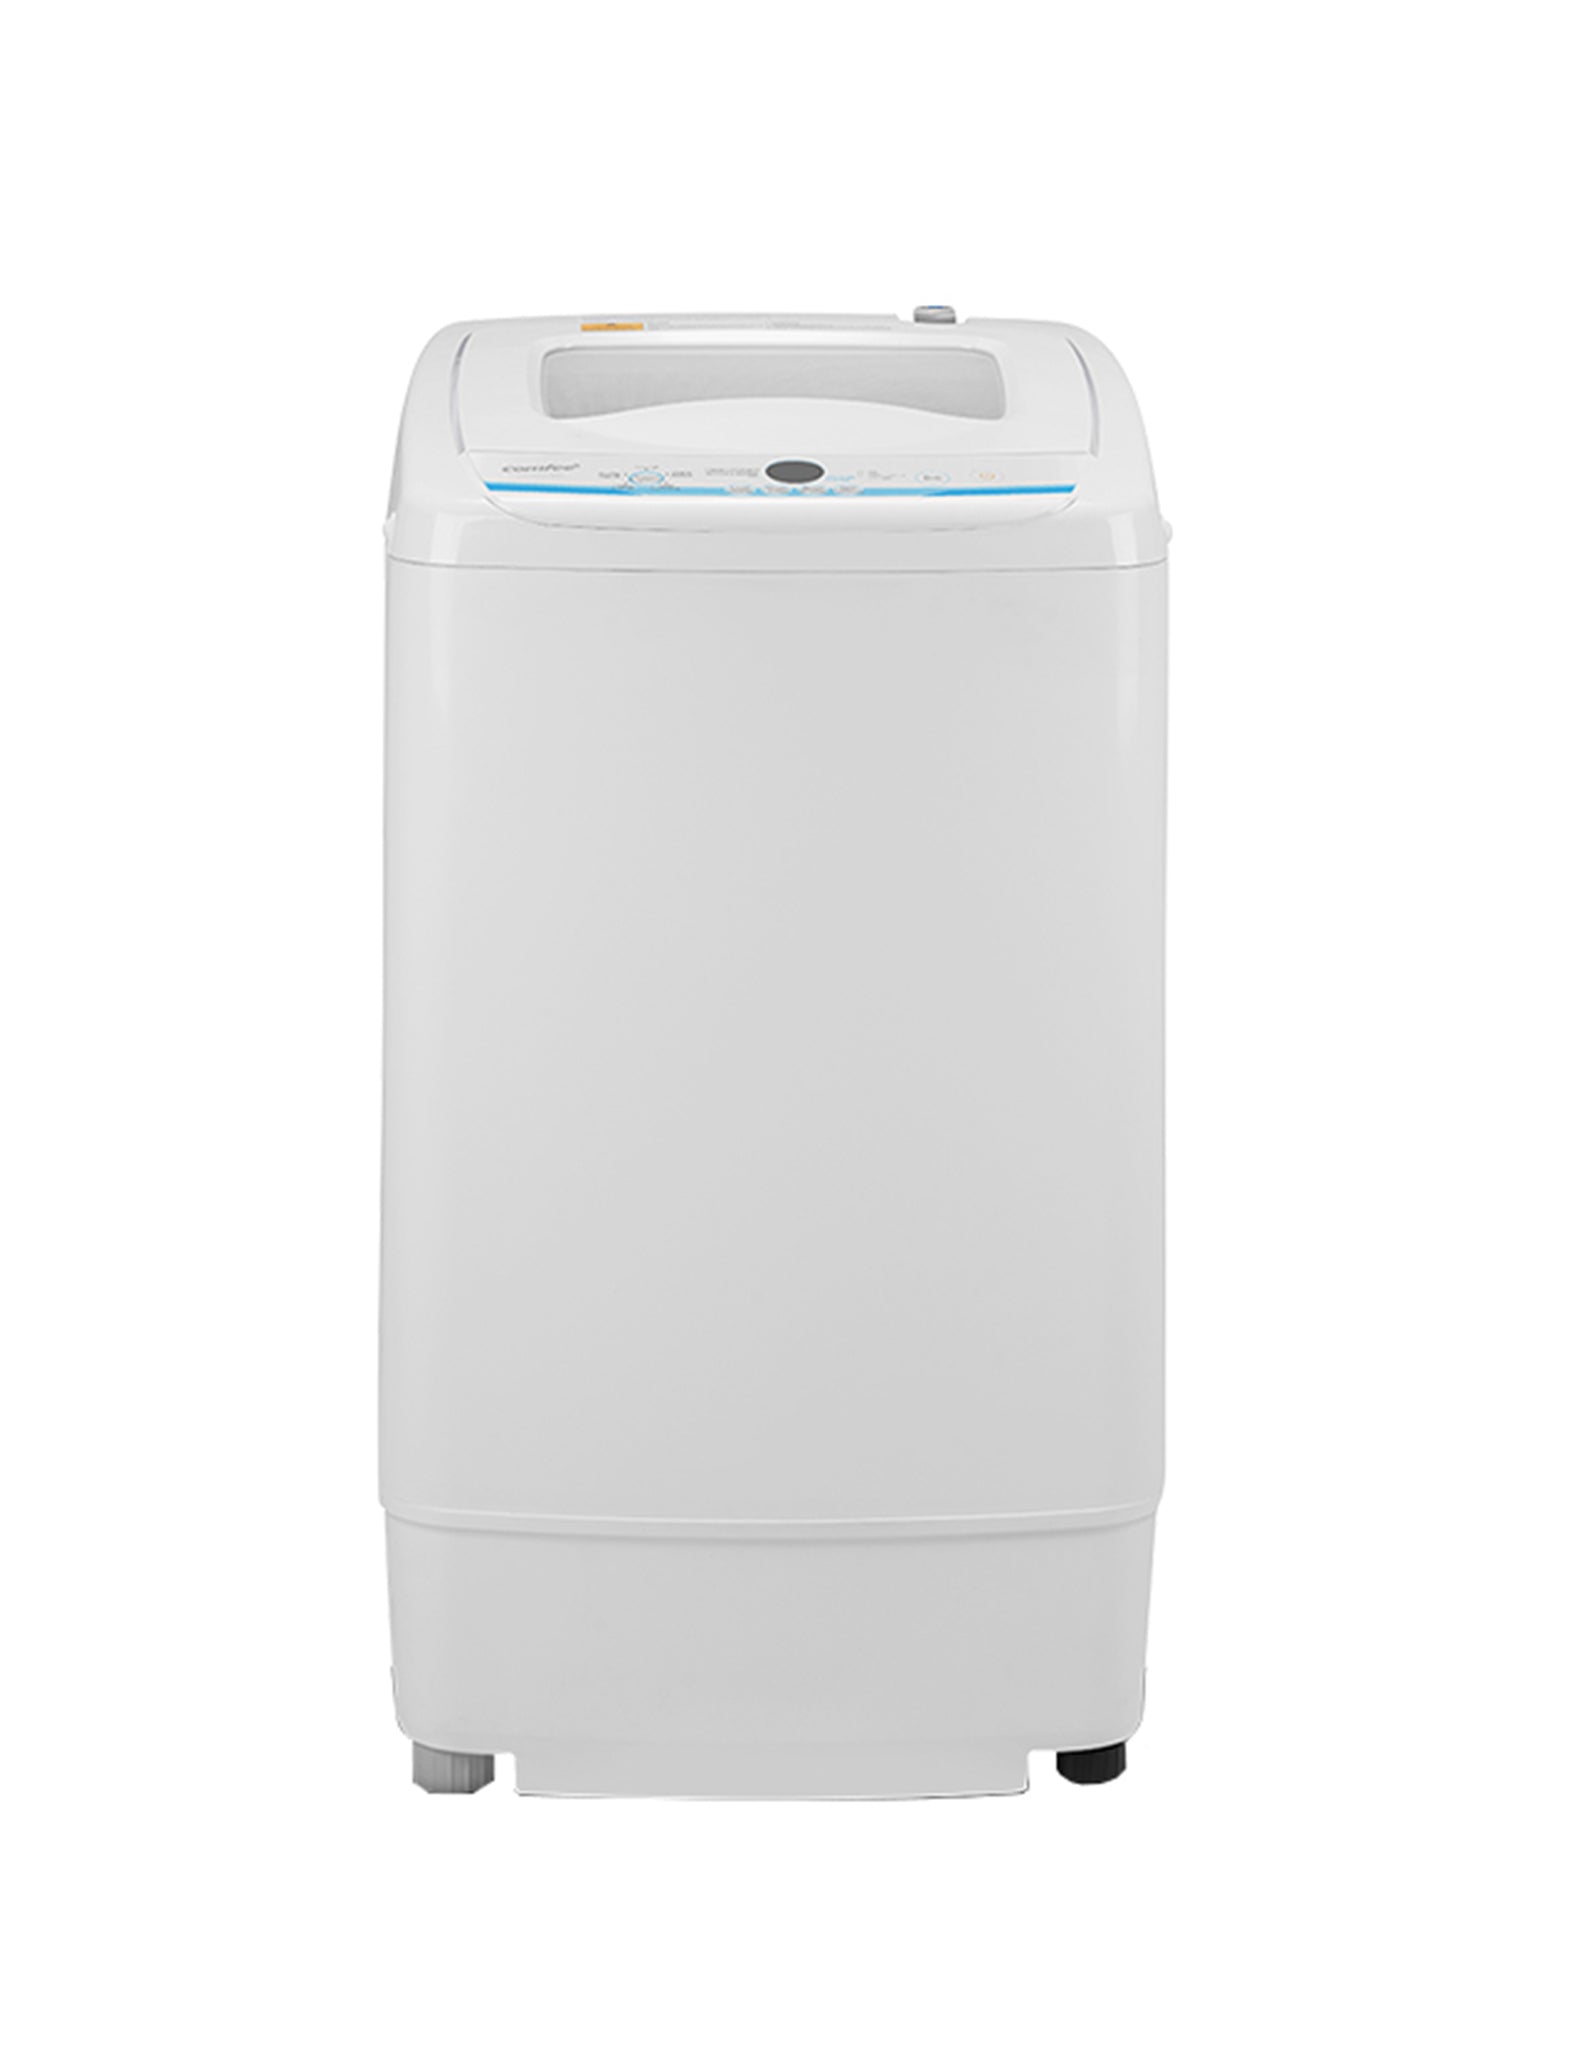 Comfee Portable Washing Machine, 0.9 Cu.Ft Compact Washer with LED Display, 5 Wash Cycles, 2 Built-In Rollers, Space Saving Full-Automatic Washer